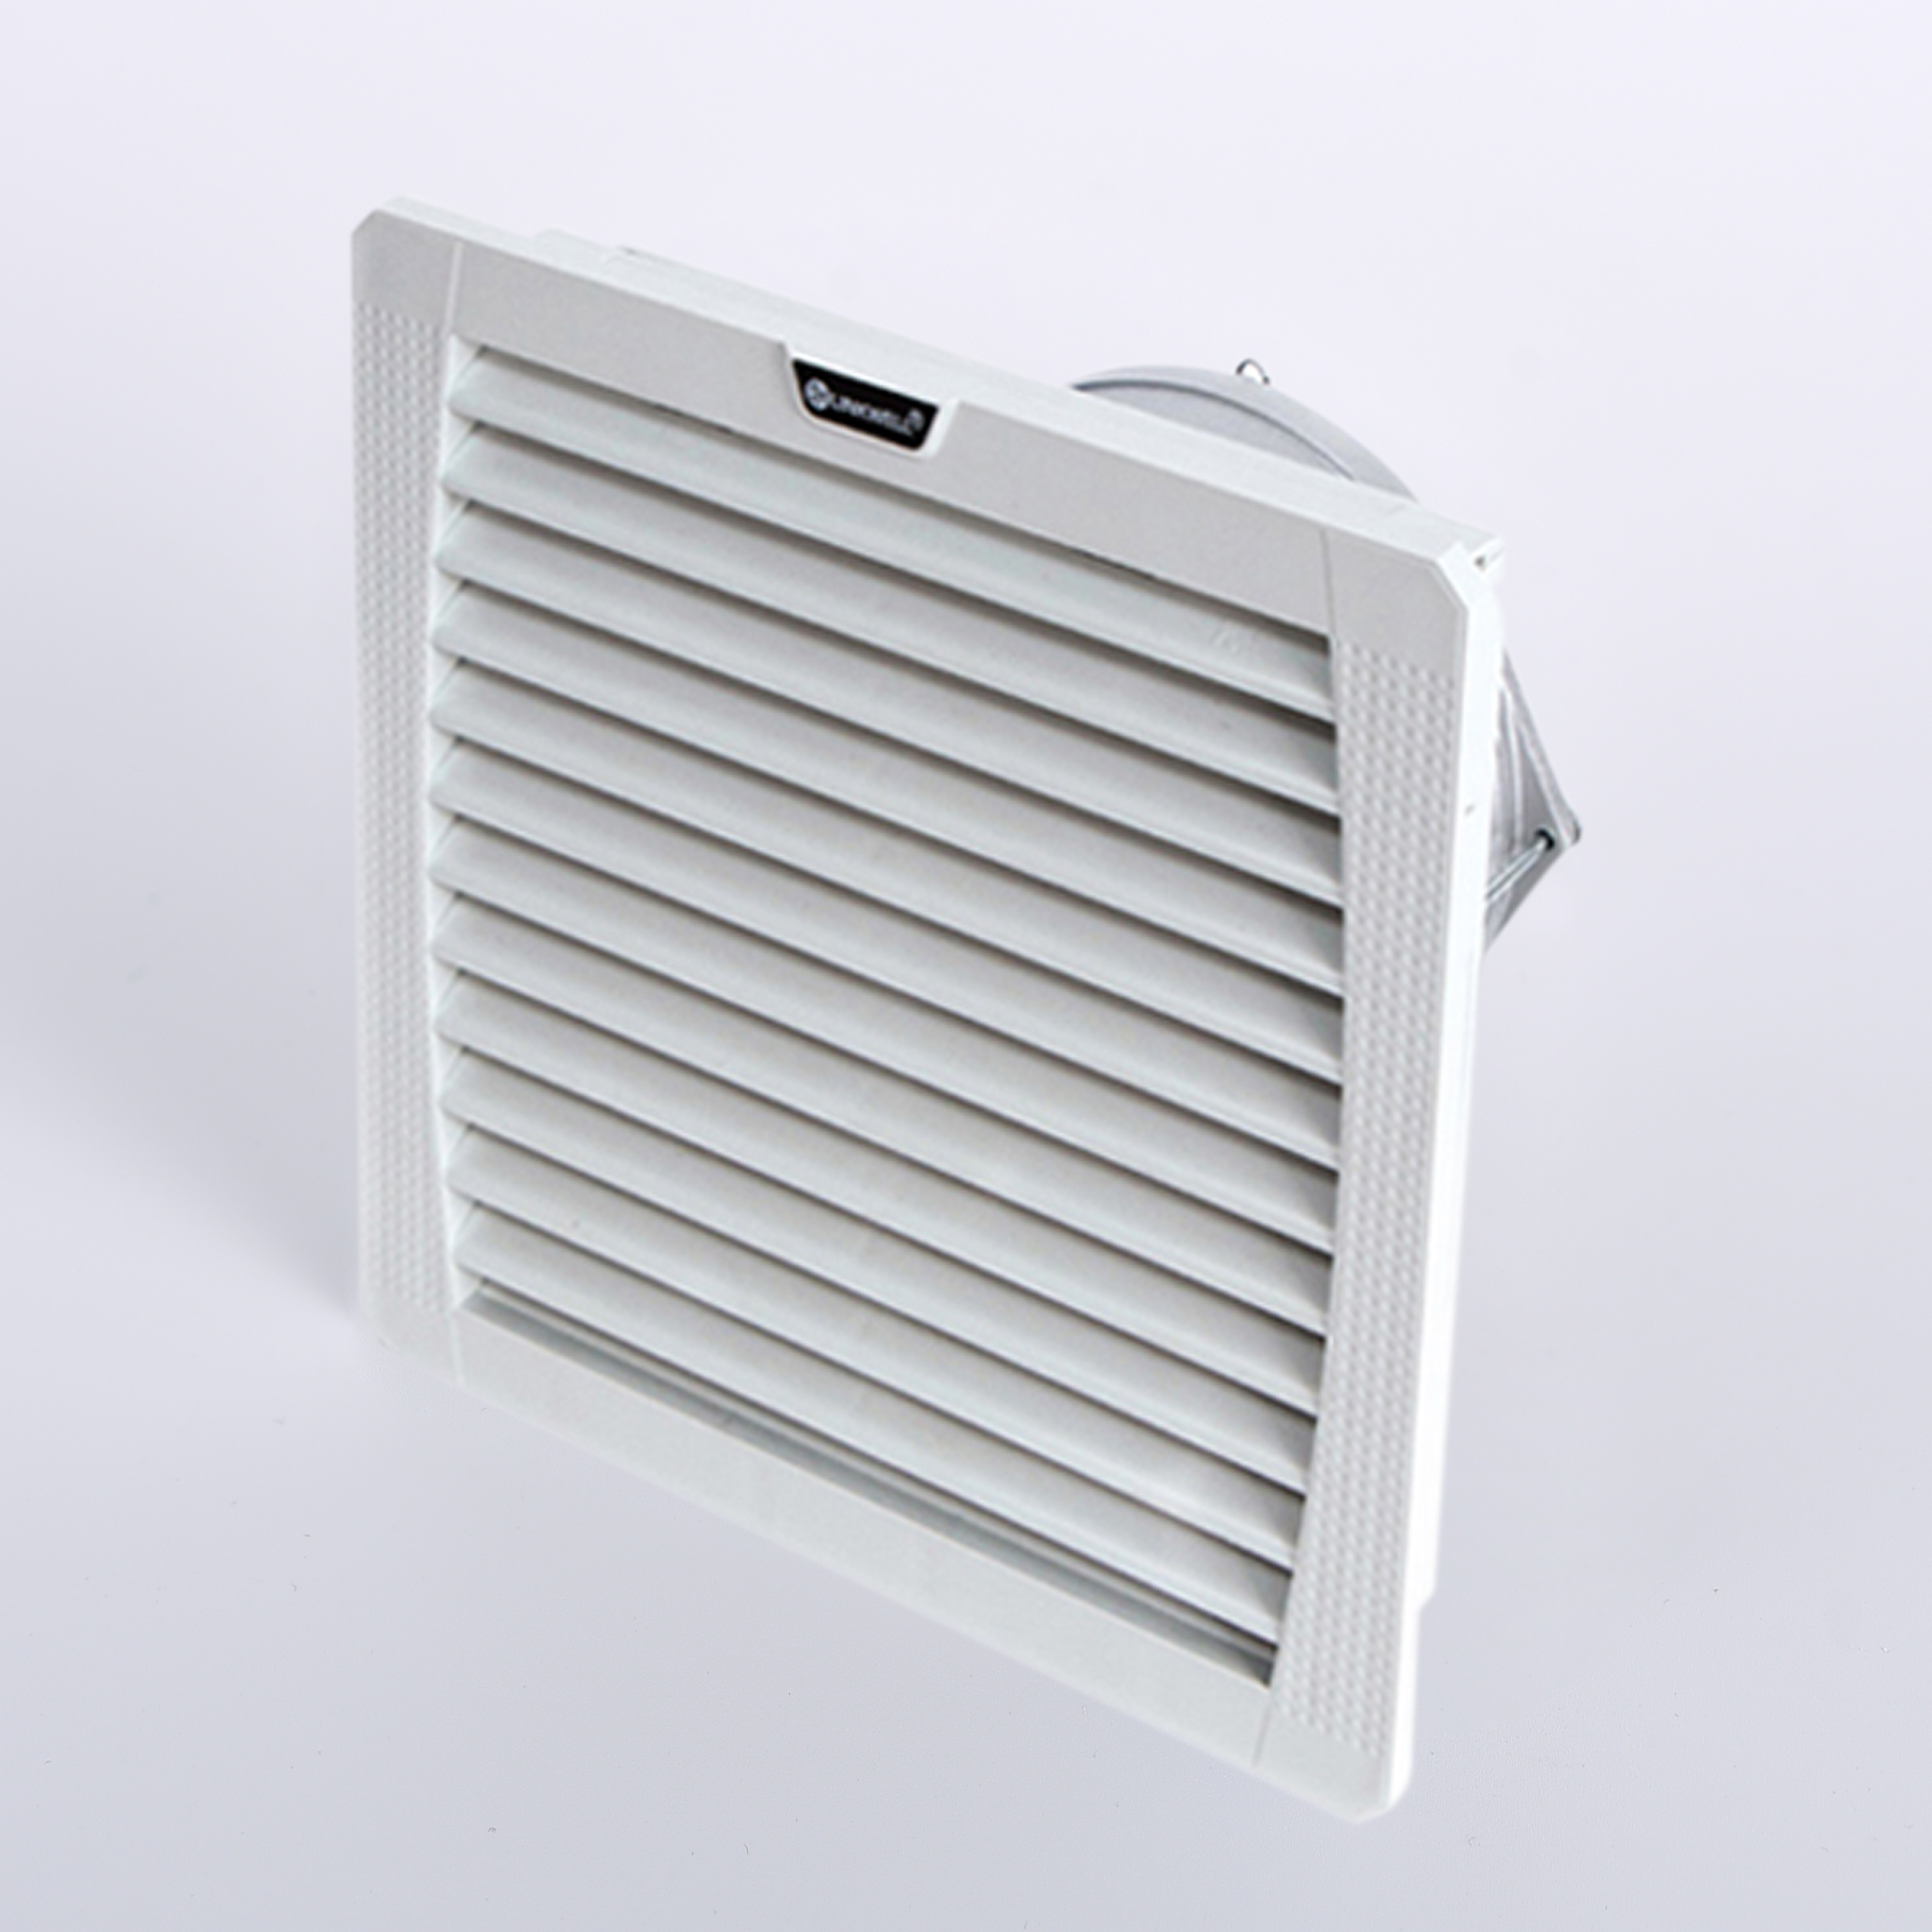 FF252 cooling fan with filter